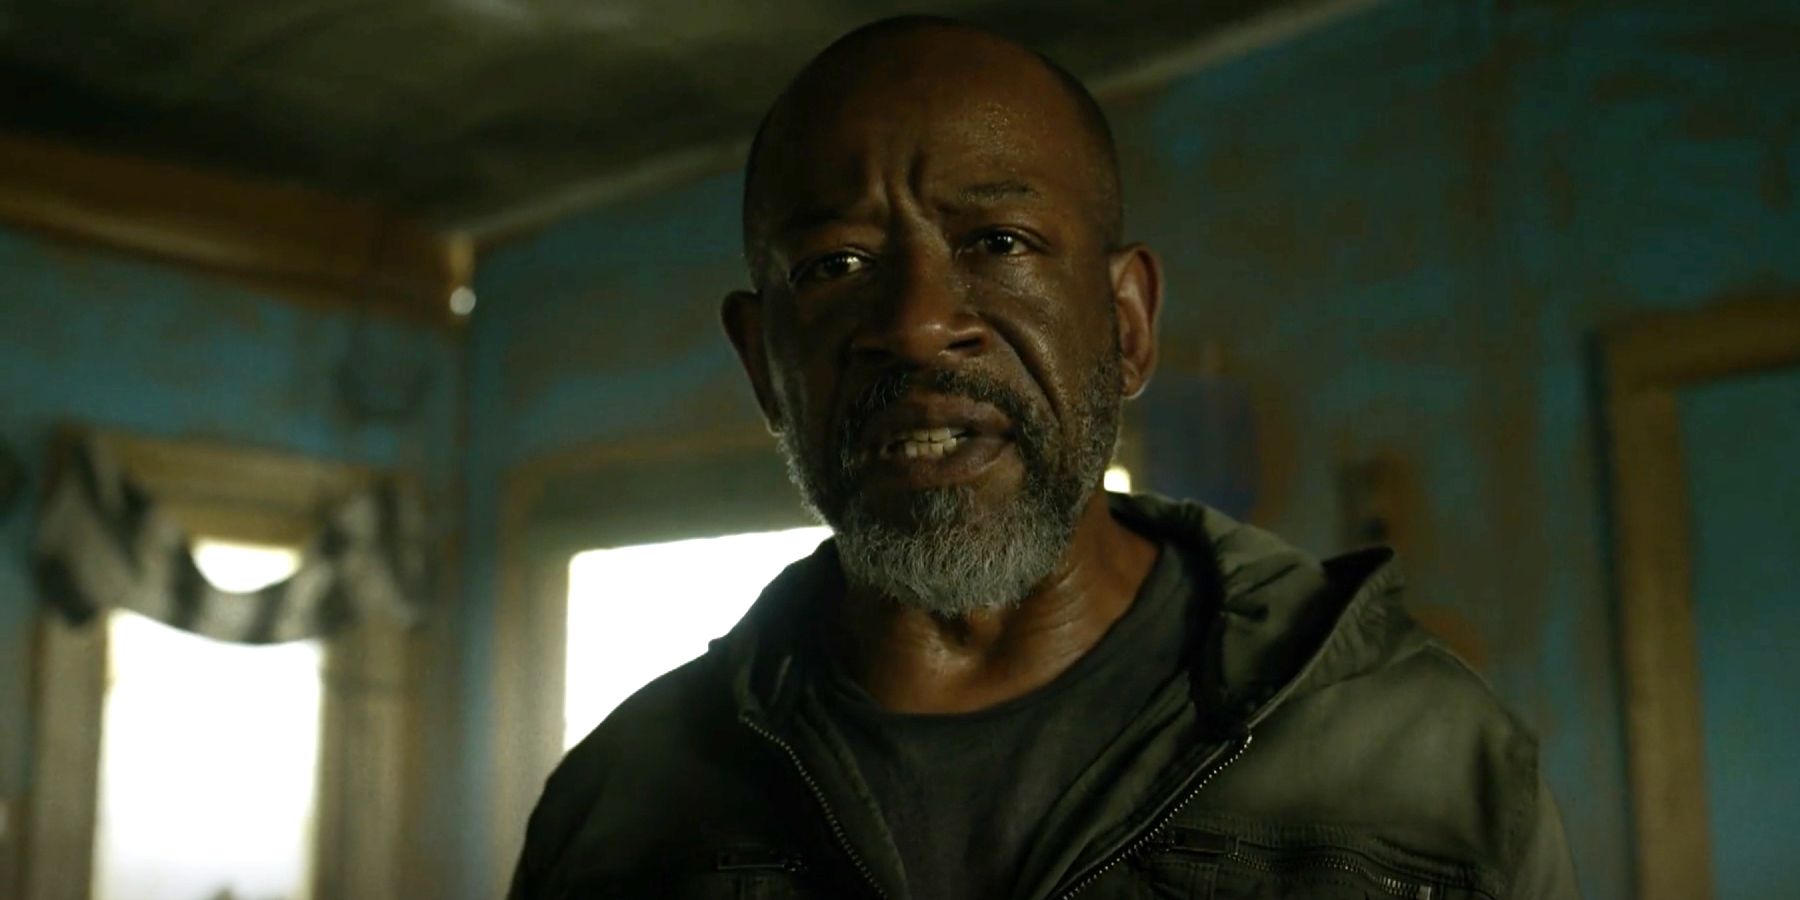 Morgan getting mad at Mo in Fear the Walking Dead season 8 episode 1